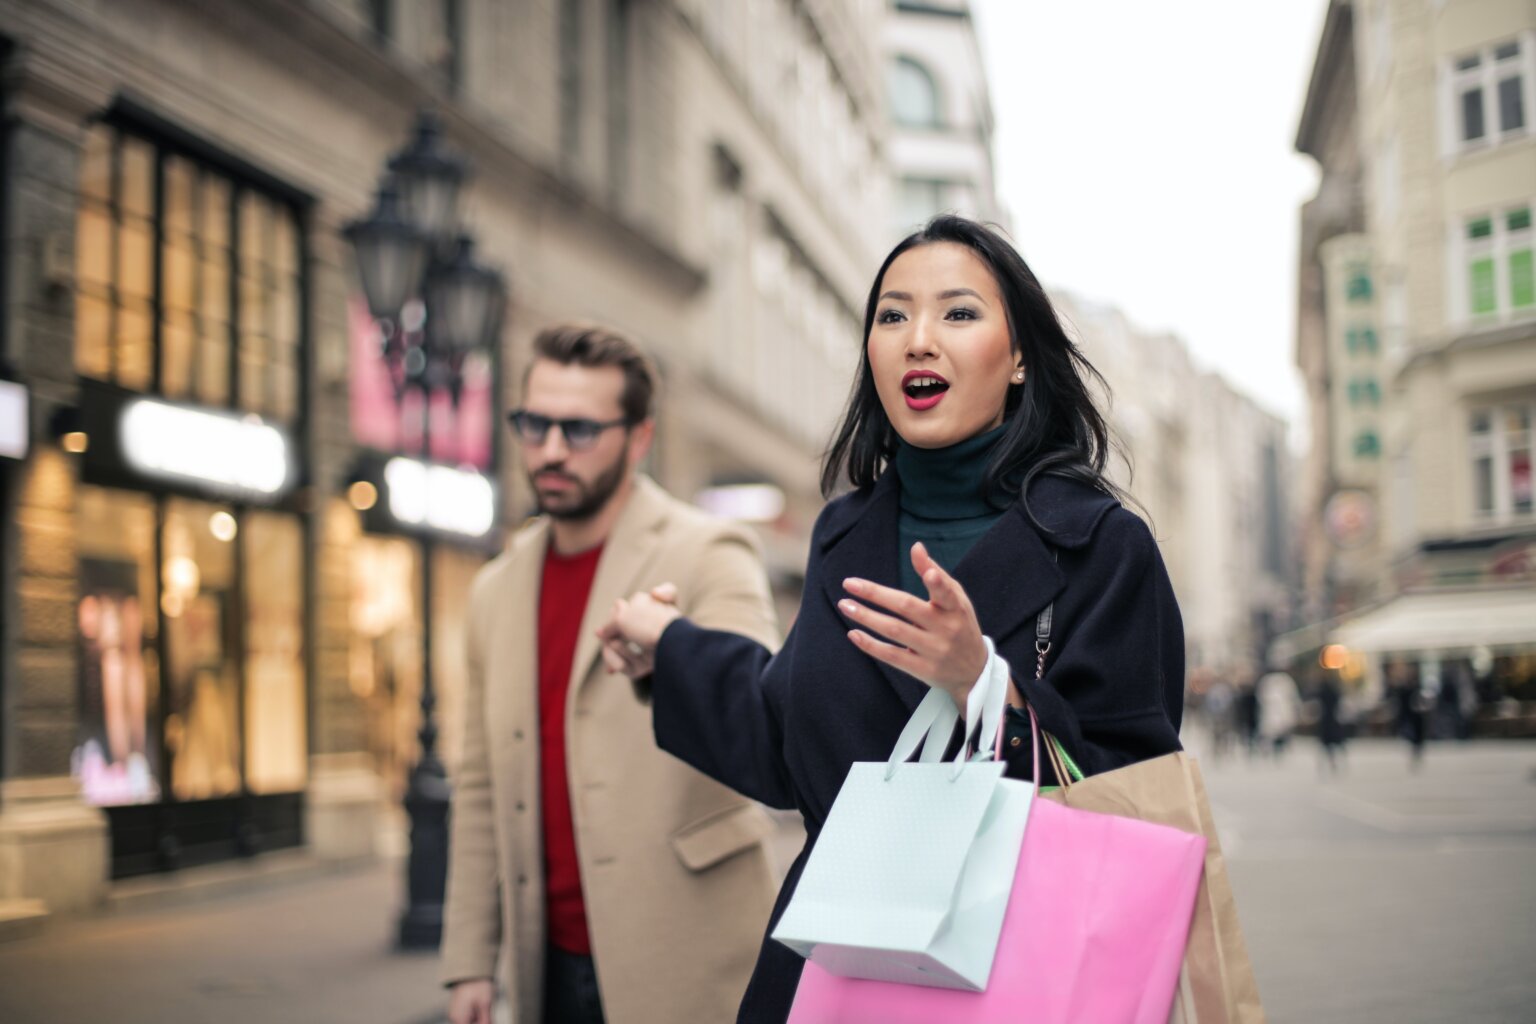 Woman holding shopping bags and a man’s hand as they shop together on Black Friday.